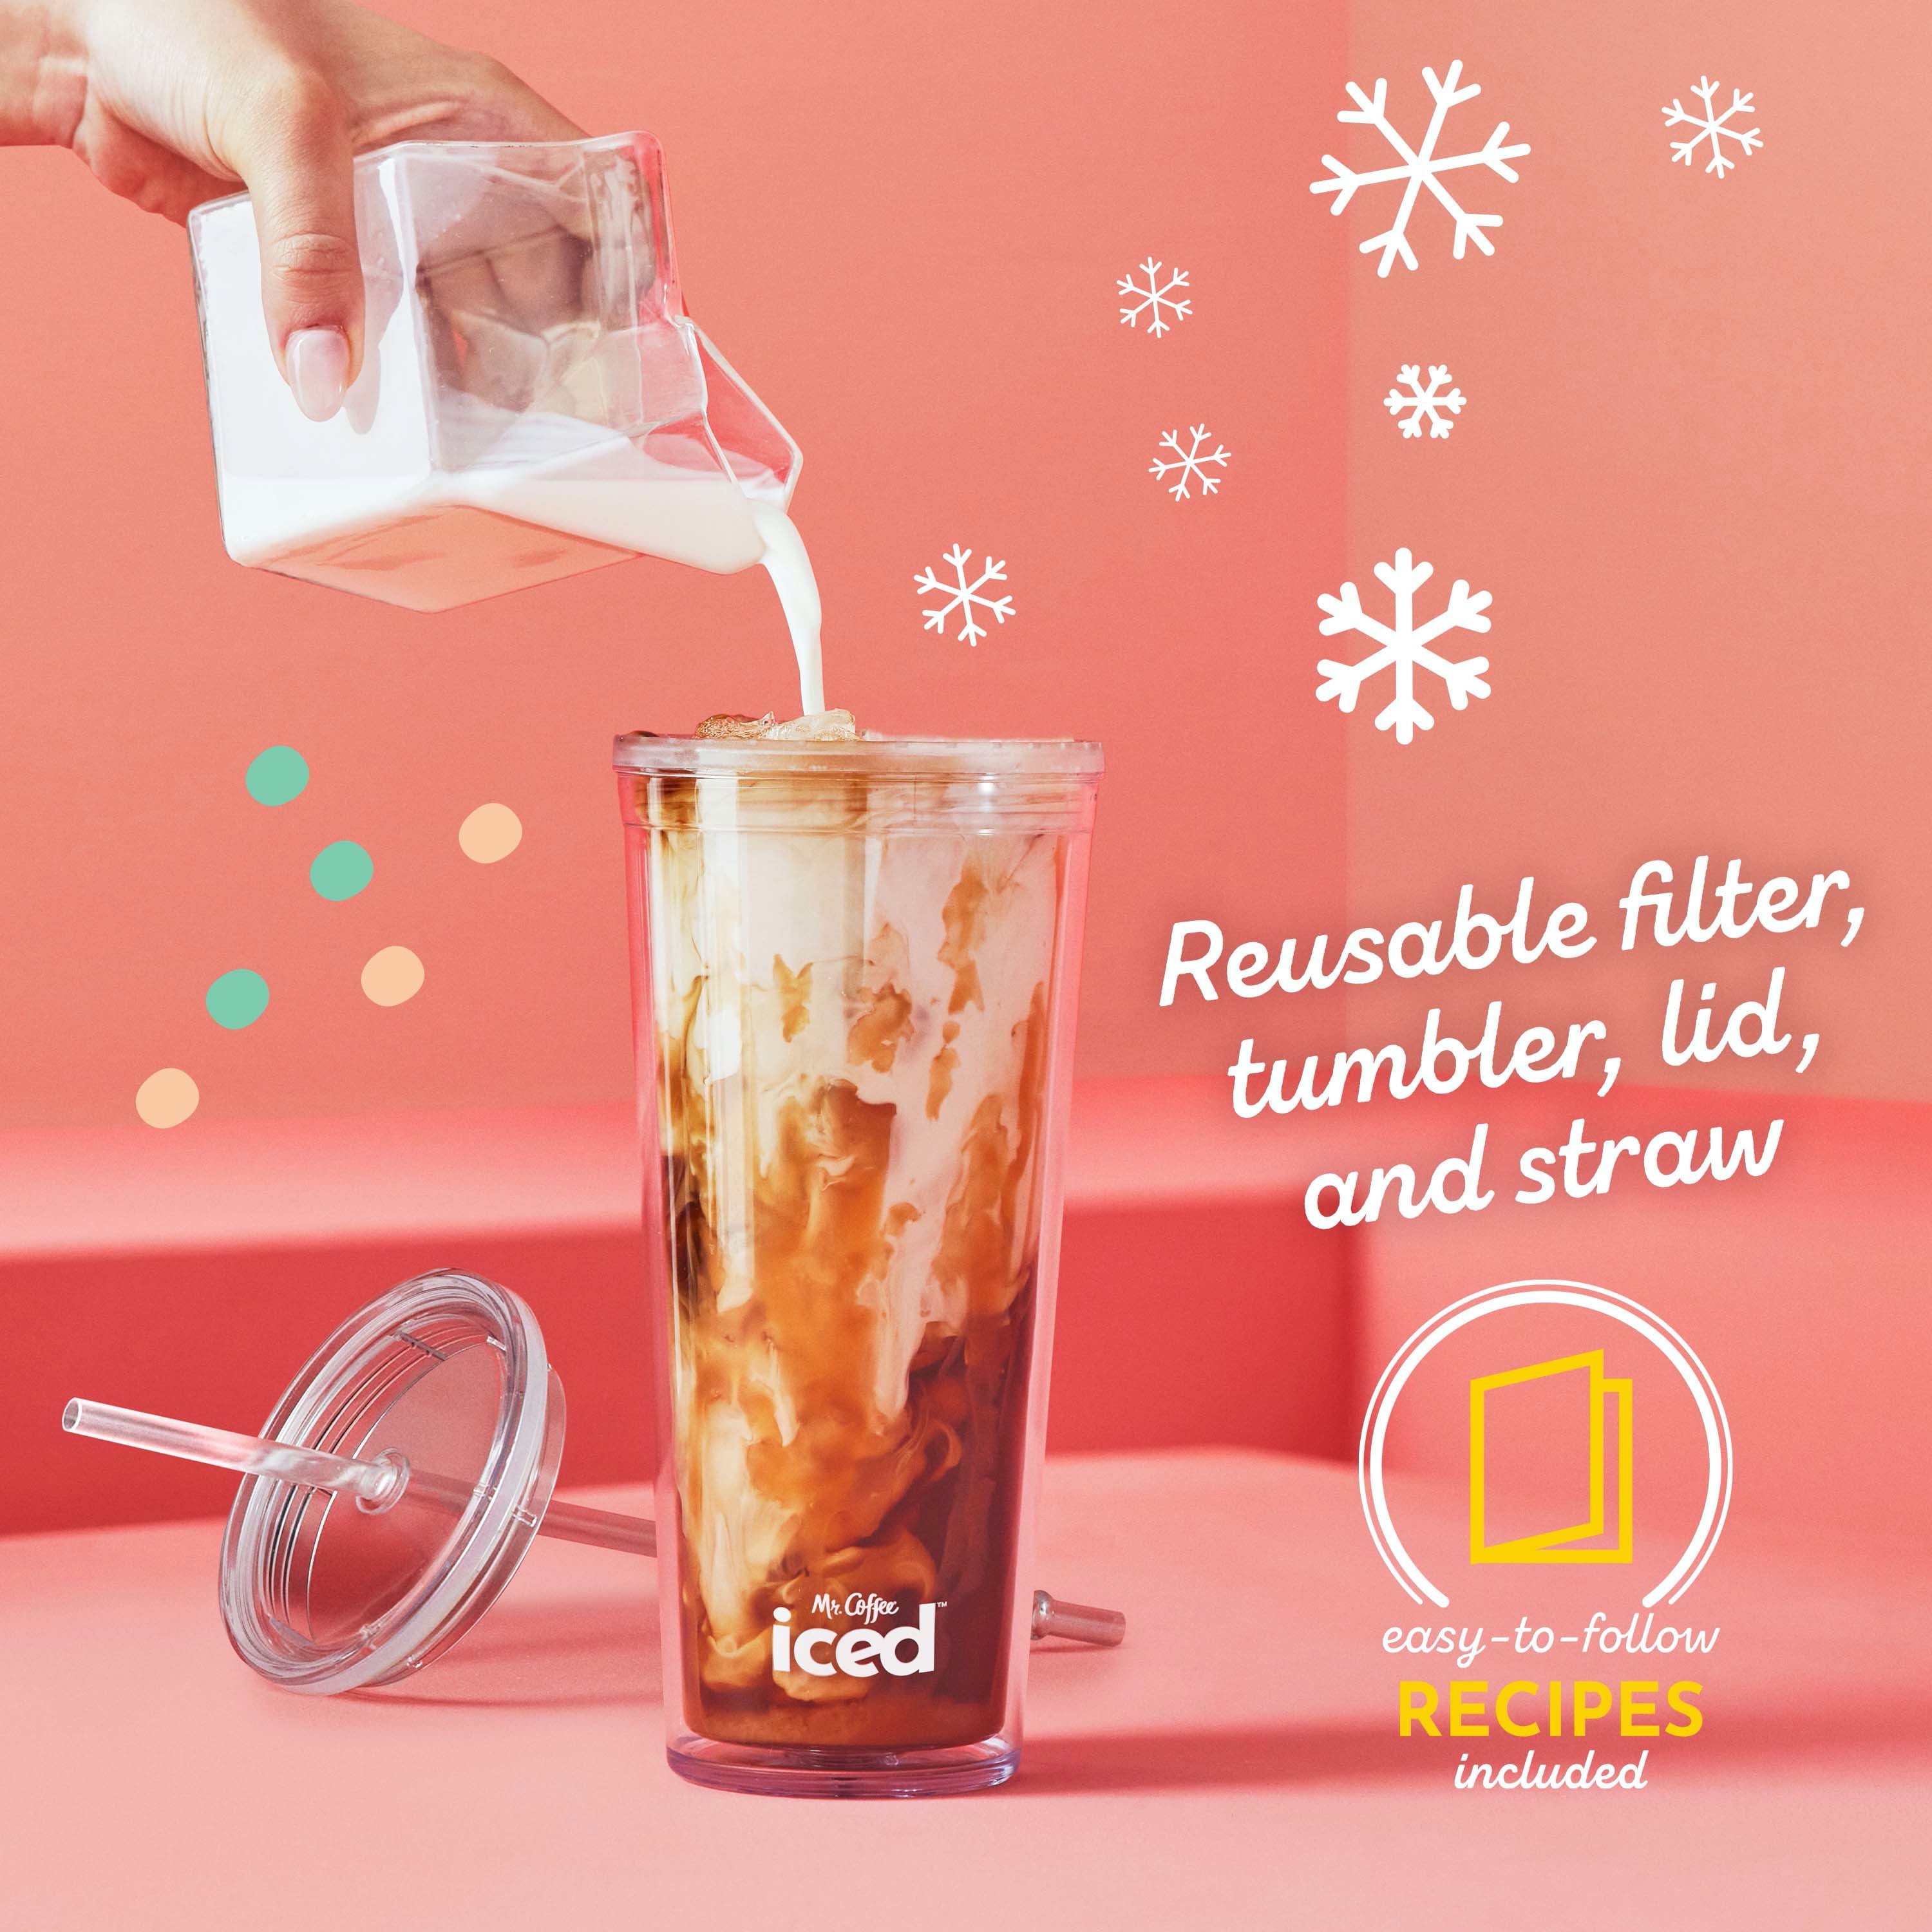 Mr. Coffee® Iced™ Coffee Maker with Reusable Tumbler and Filter